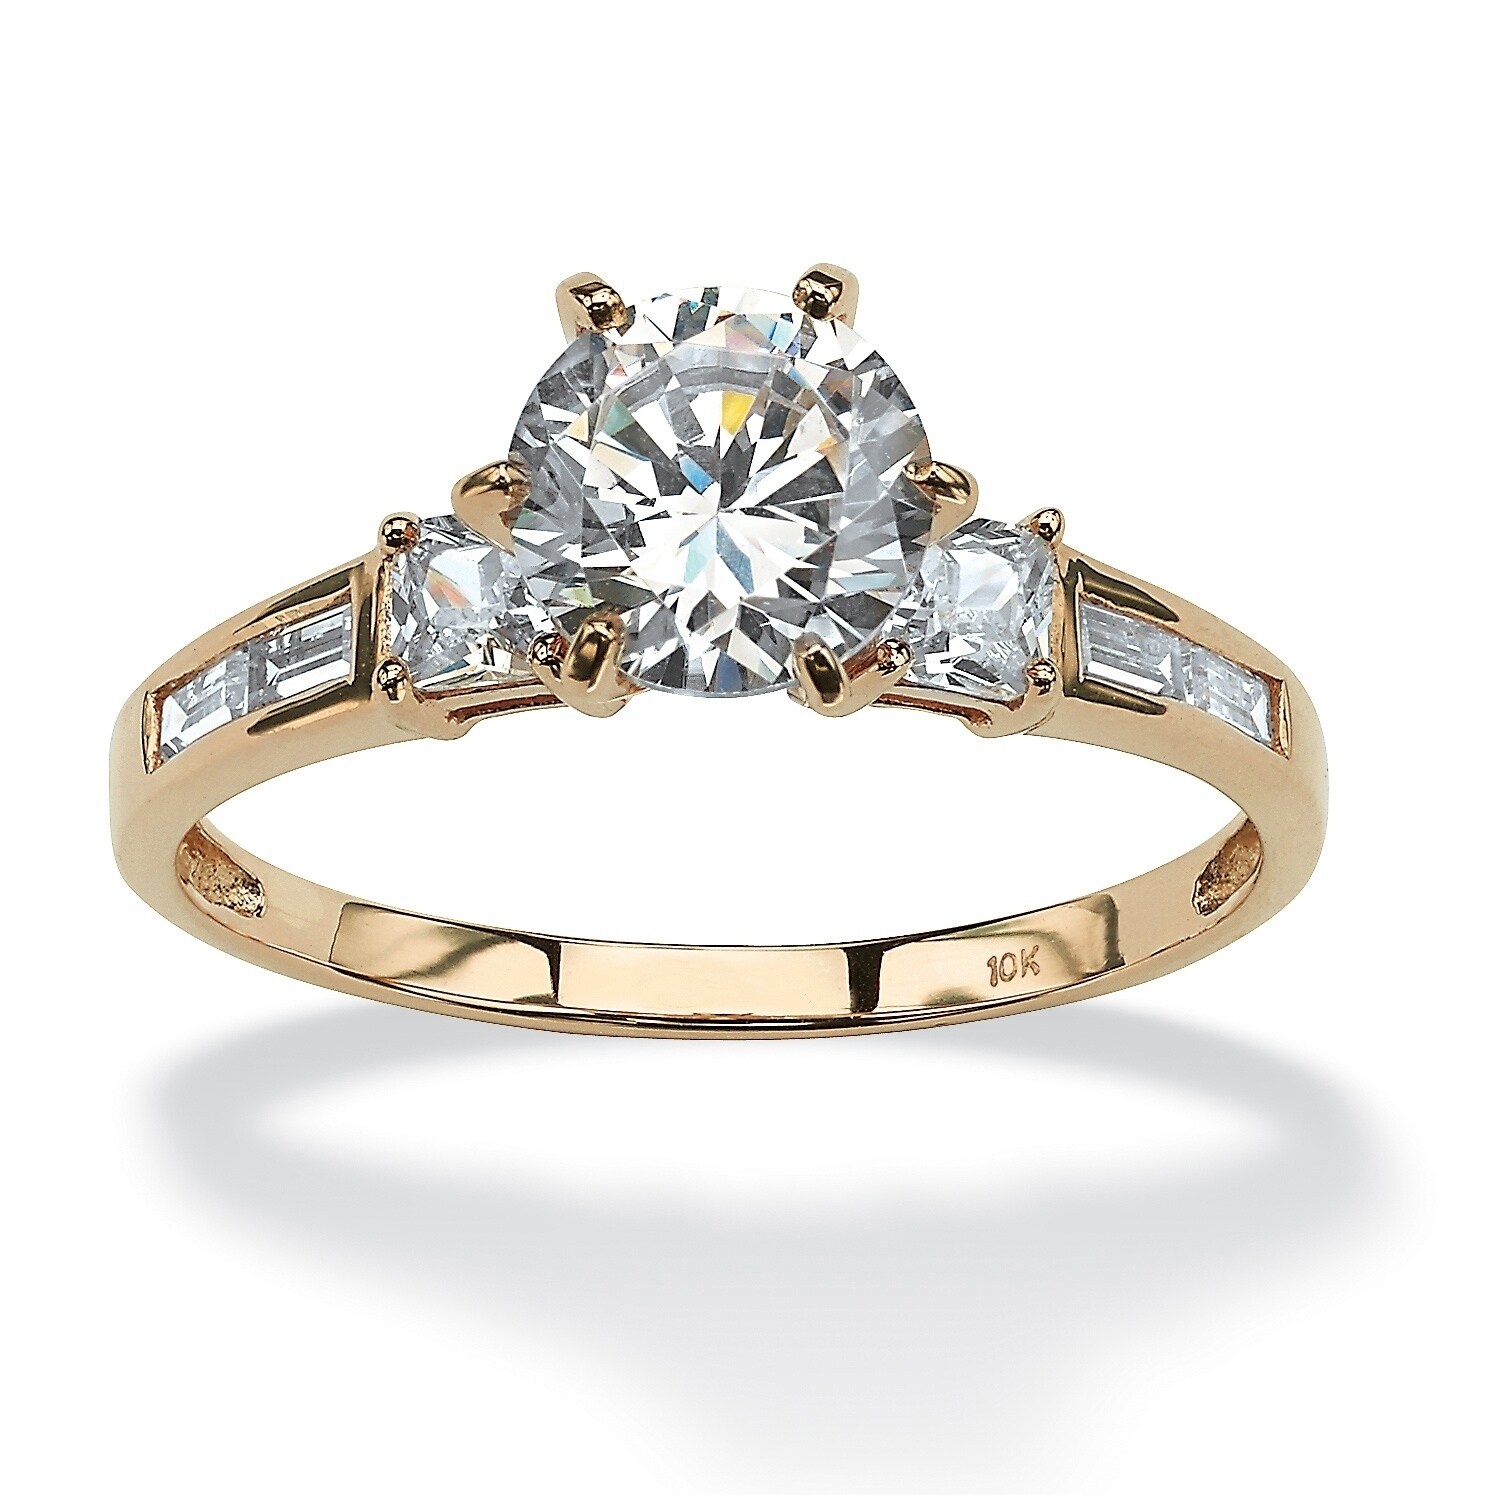 yellow gold clear cubic zirconia ring msrp $ 427 00 sale $ 168 29 off